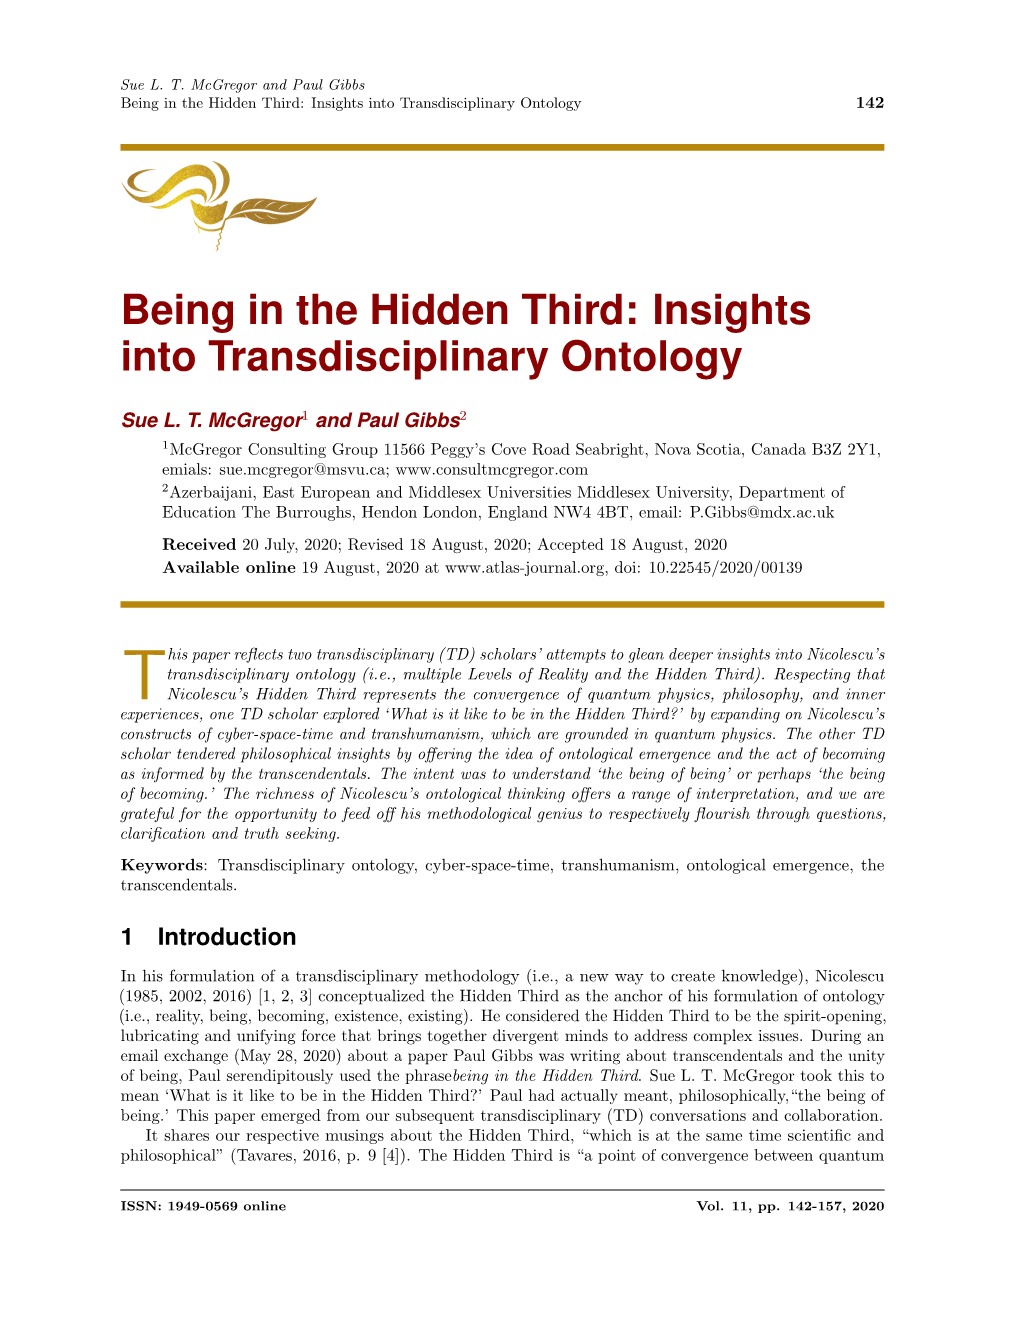 Being in the Hidden Third: Insights Into Transdisciplinary Ontology 142